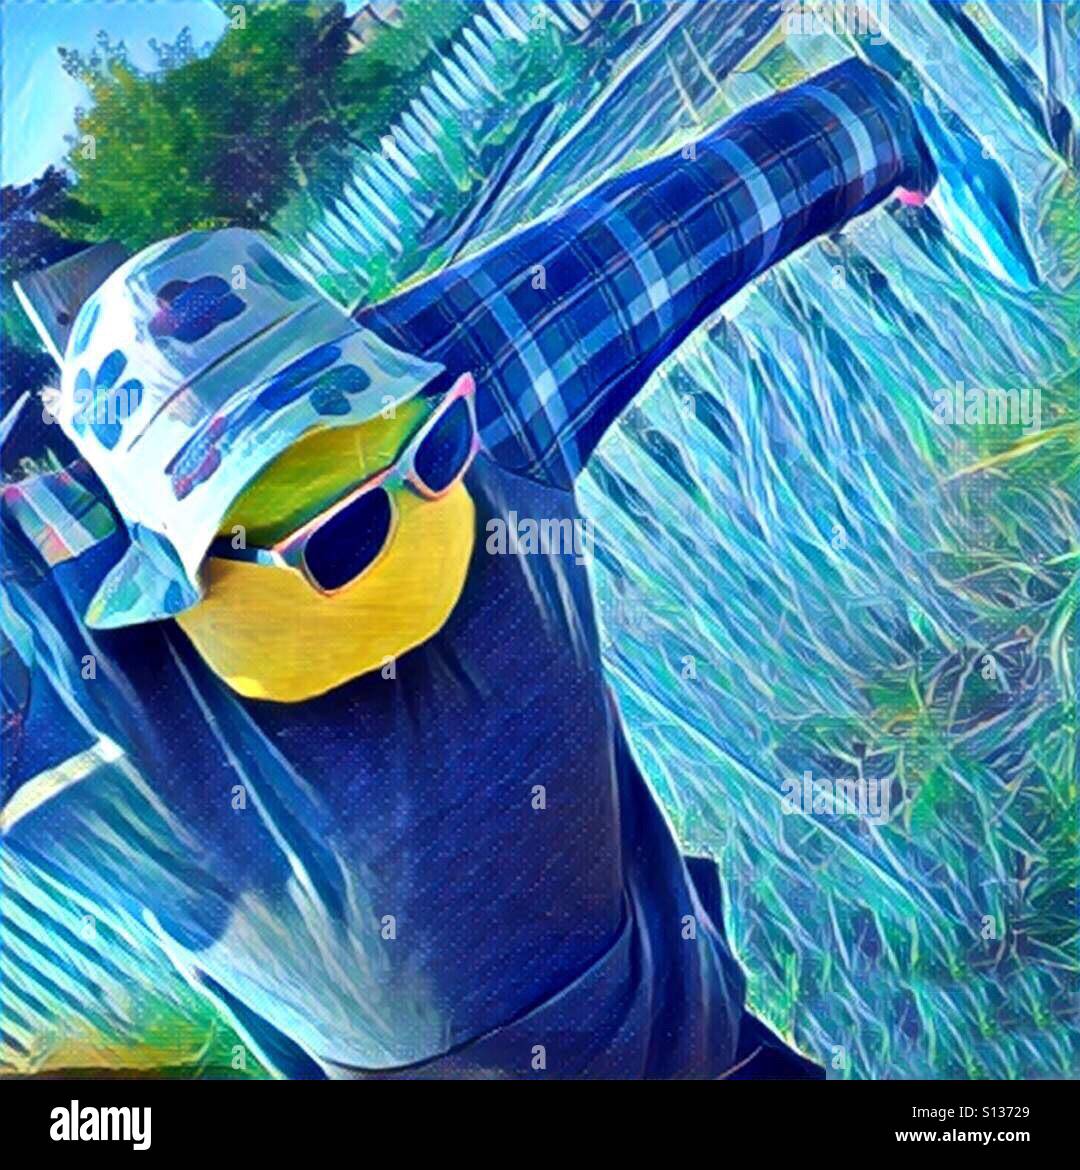 Blue scarecrow with a hat and sunglasses Stock Photo